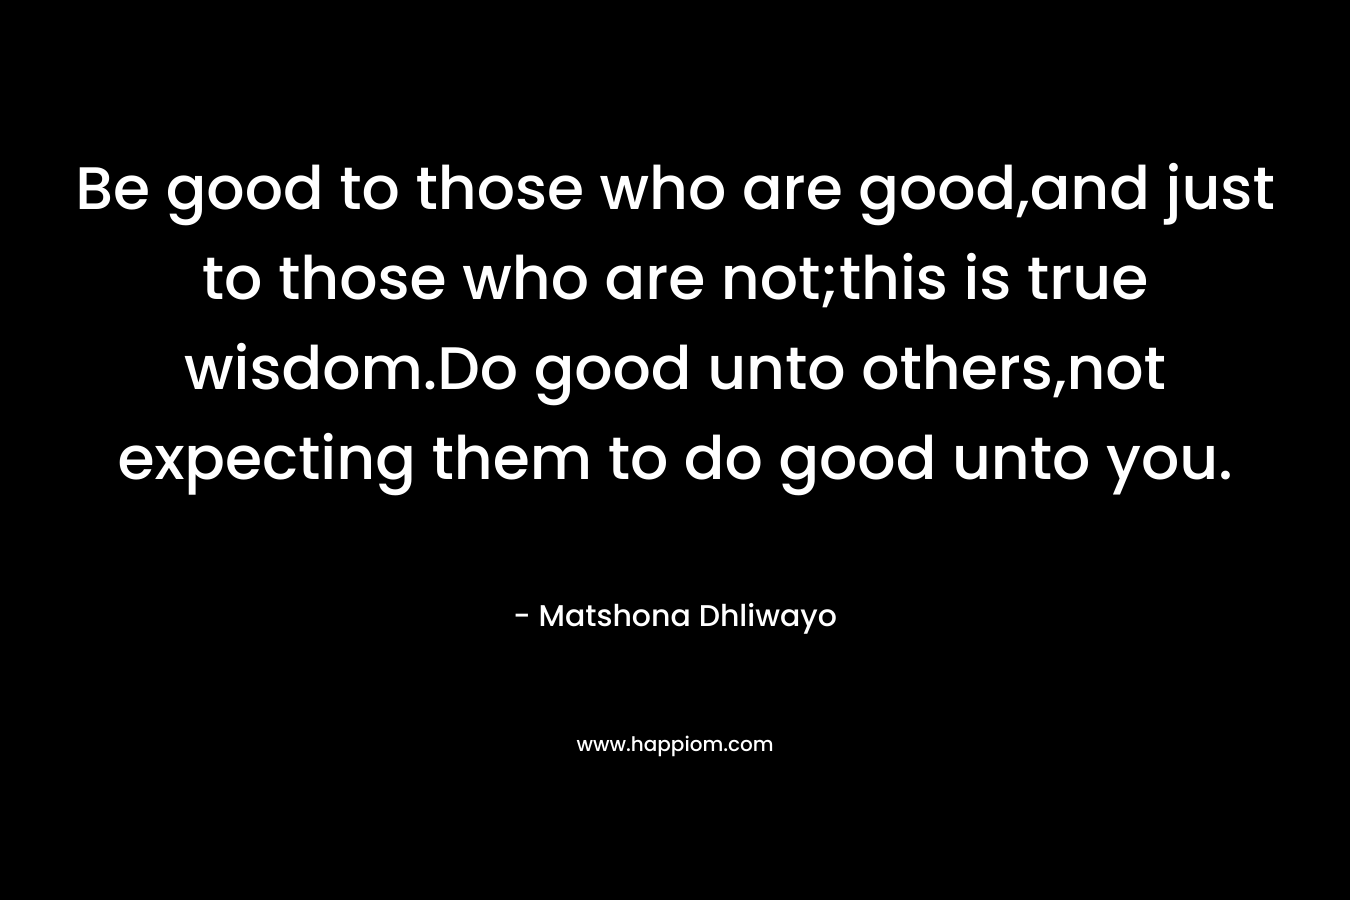 Be good to those who are good,and just to those who are not;this is true wisdom.Do good unto others,not expecting them to do good unto you.